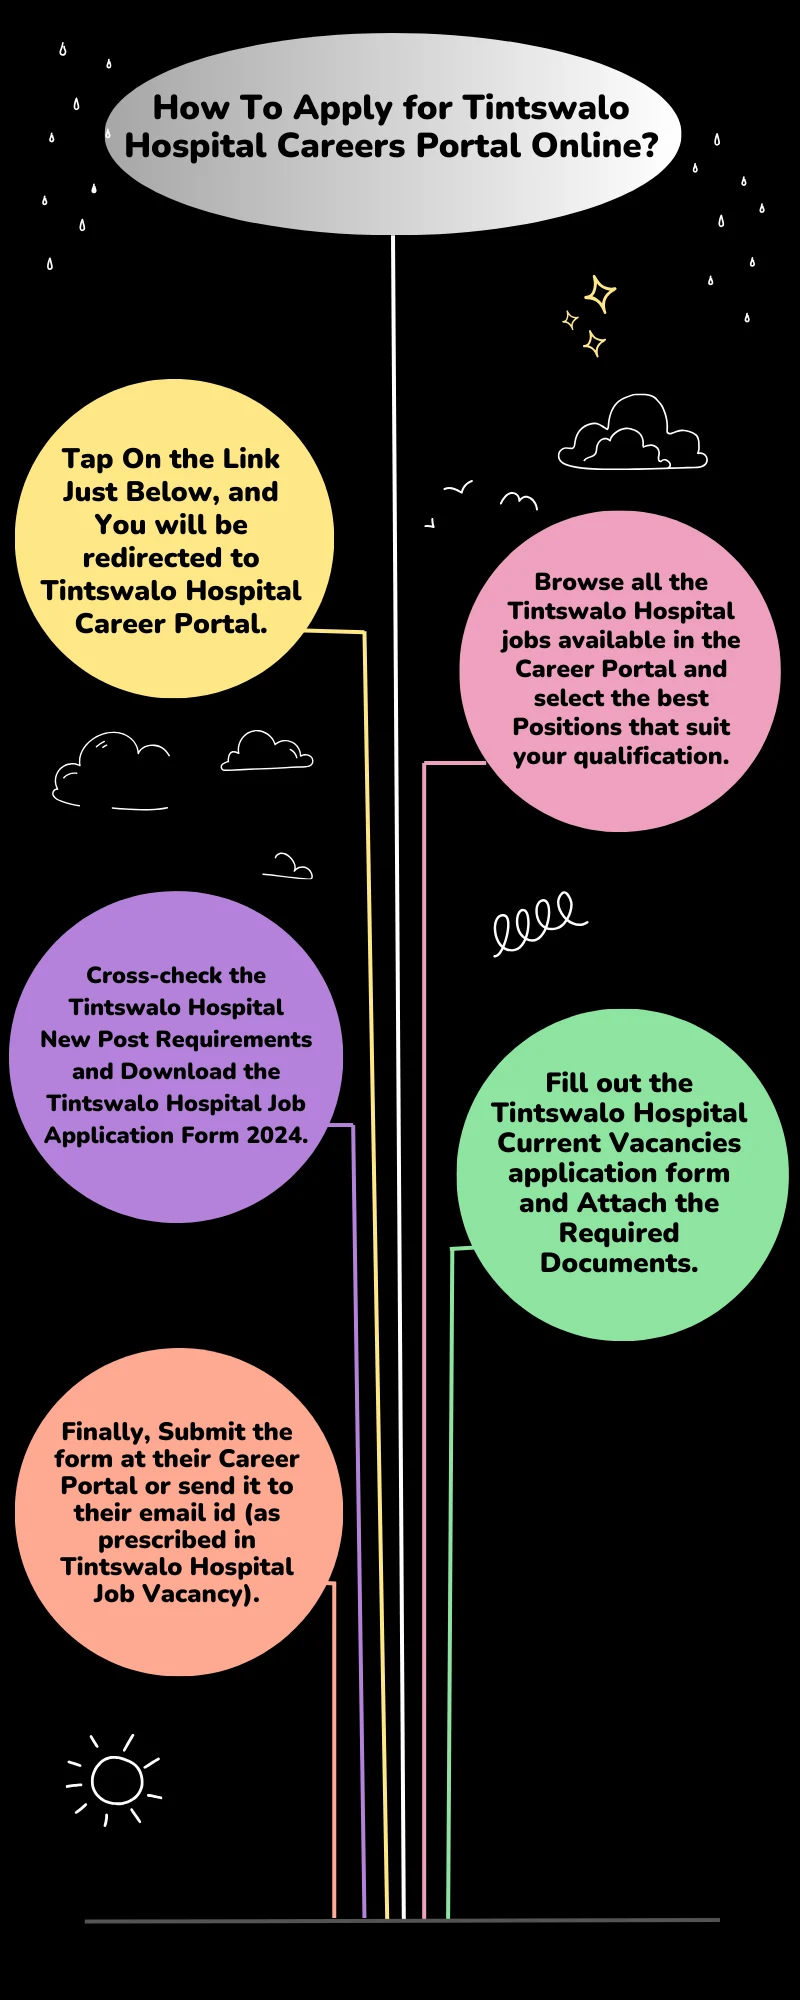 How To Apply for Tintswalo Hospital Careers Portal Online?